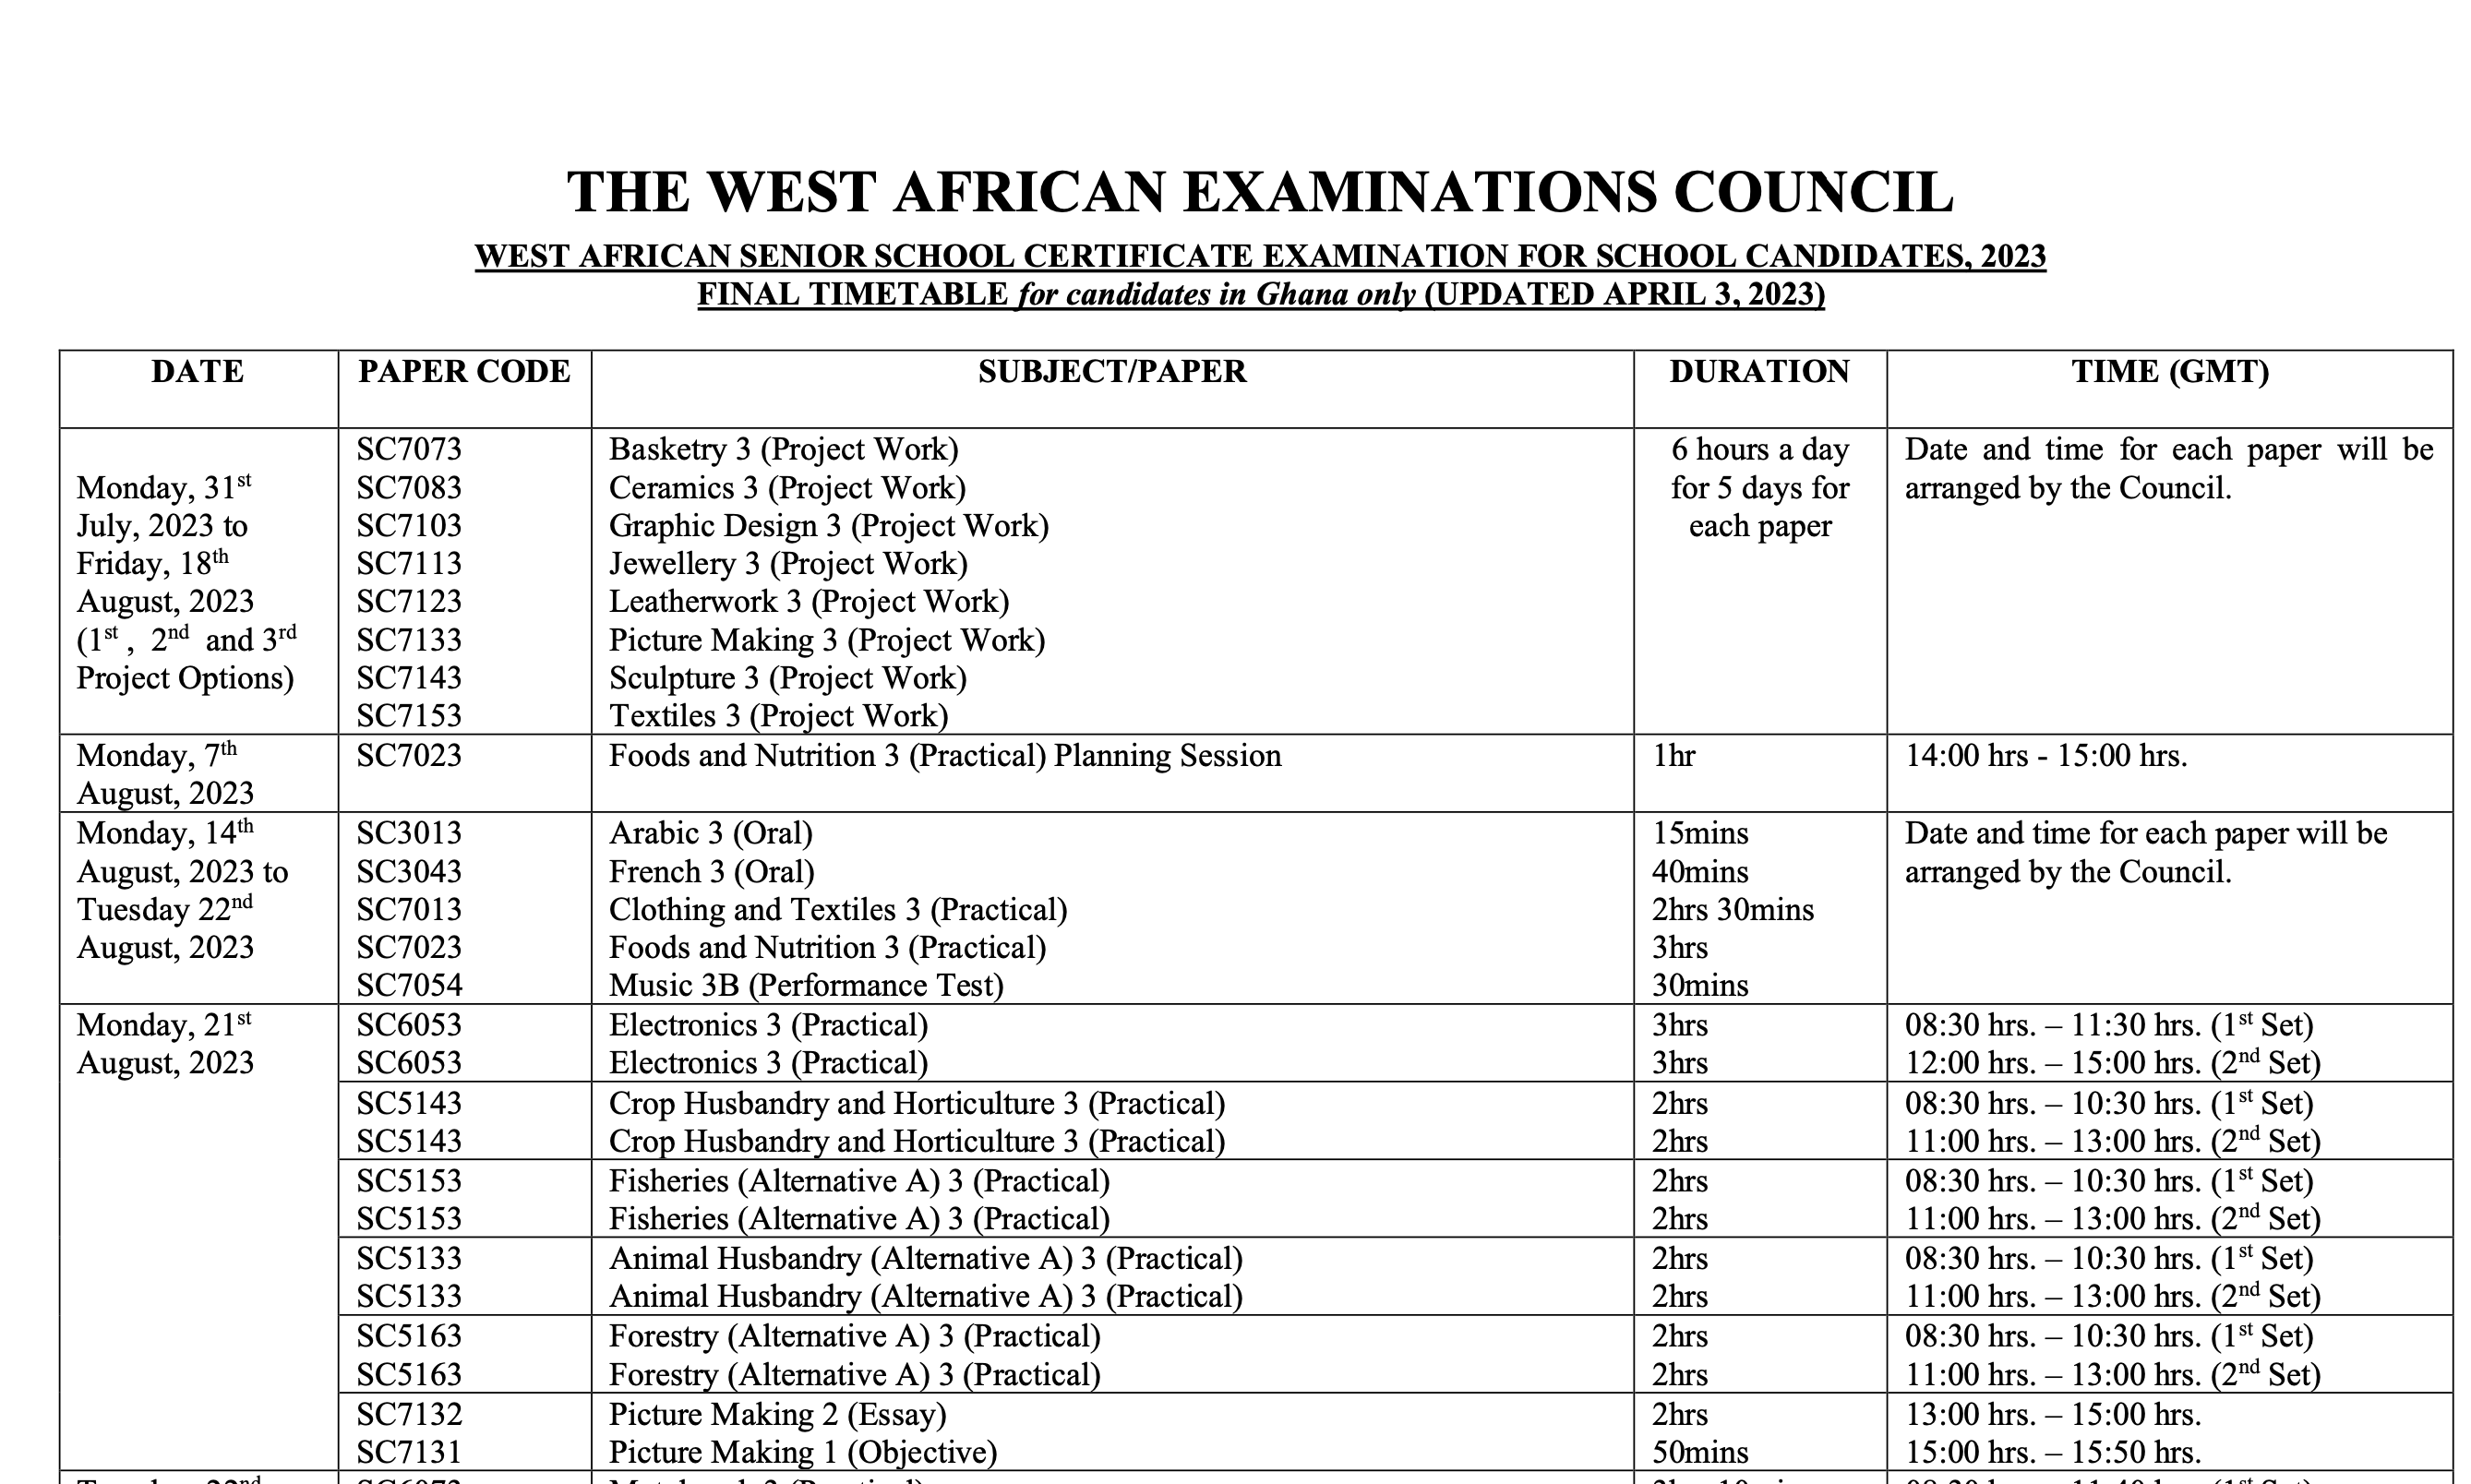 Wassce 2023 Timetable For School Candidates Now Out, Download Here